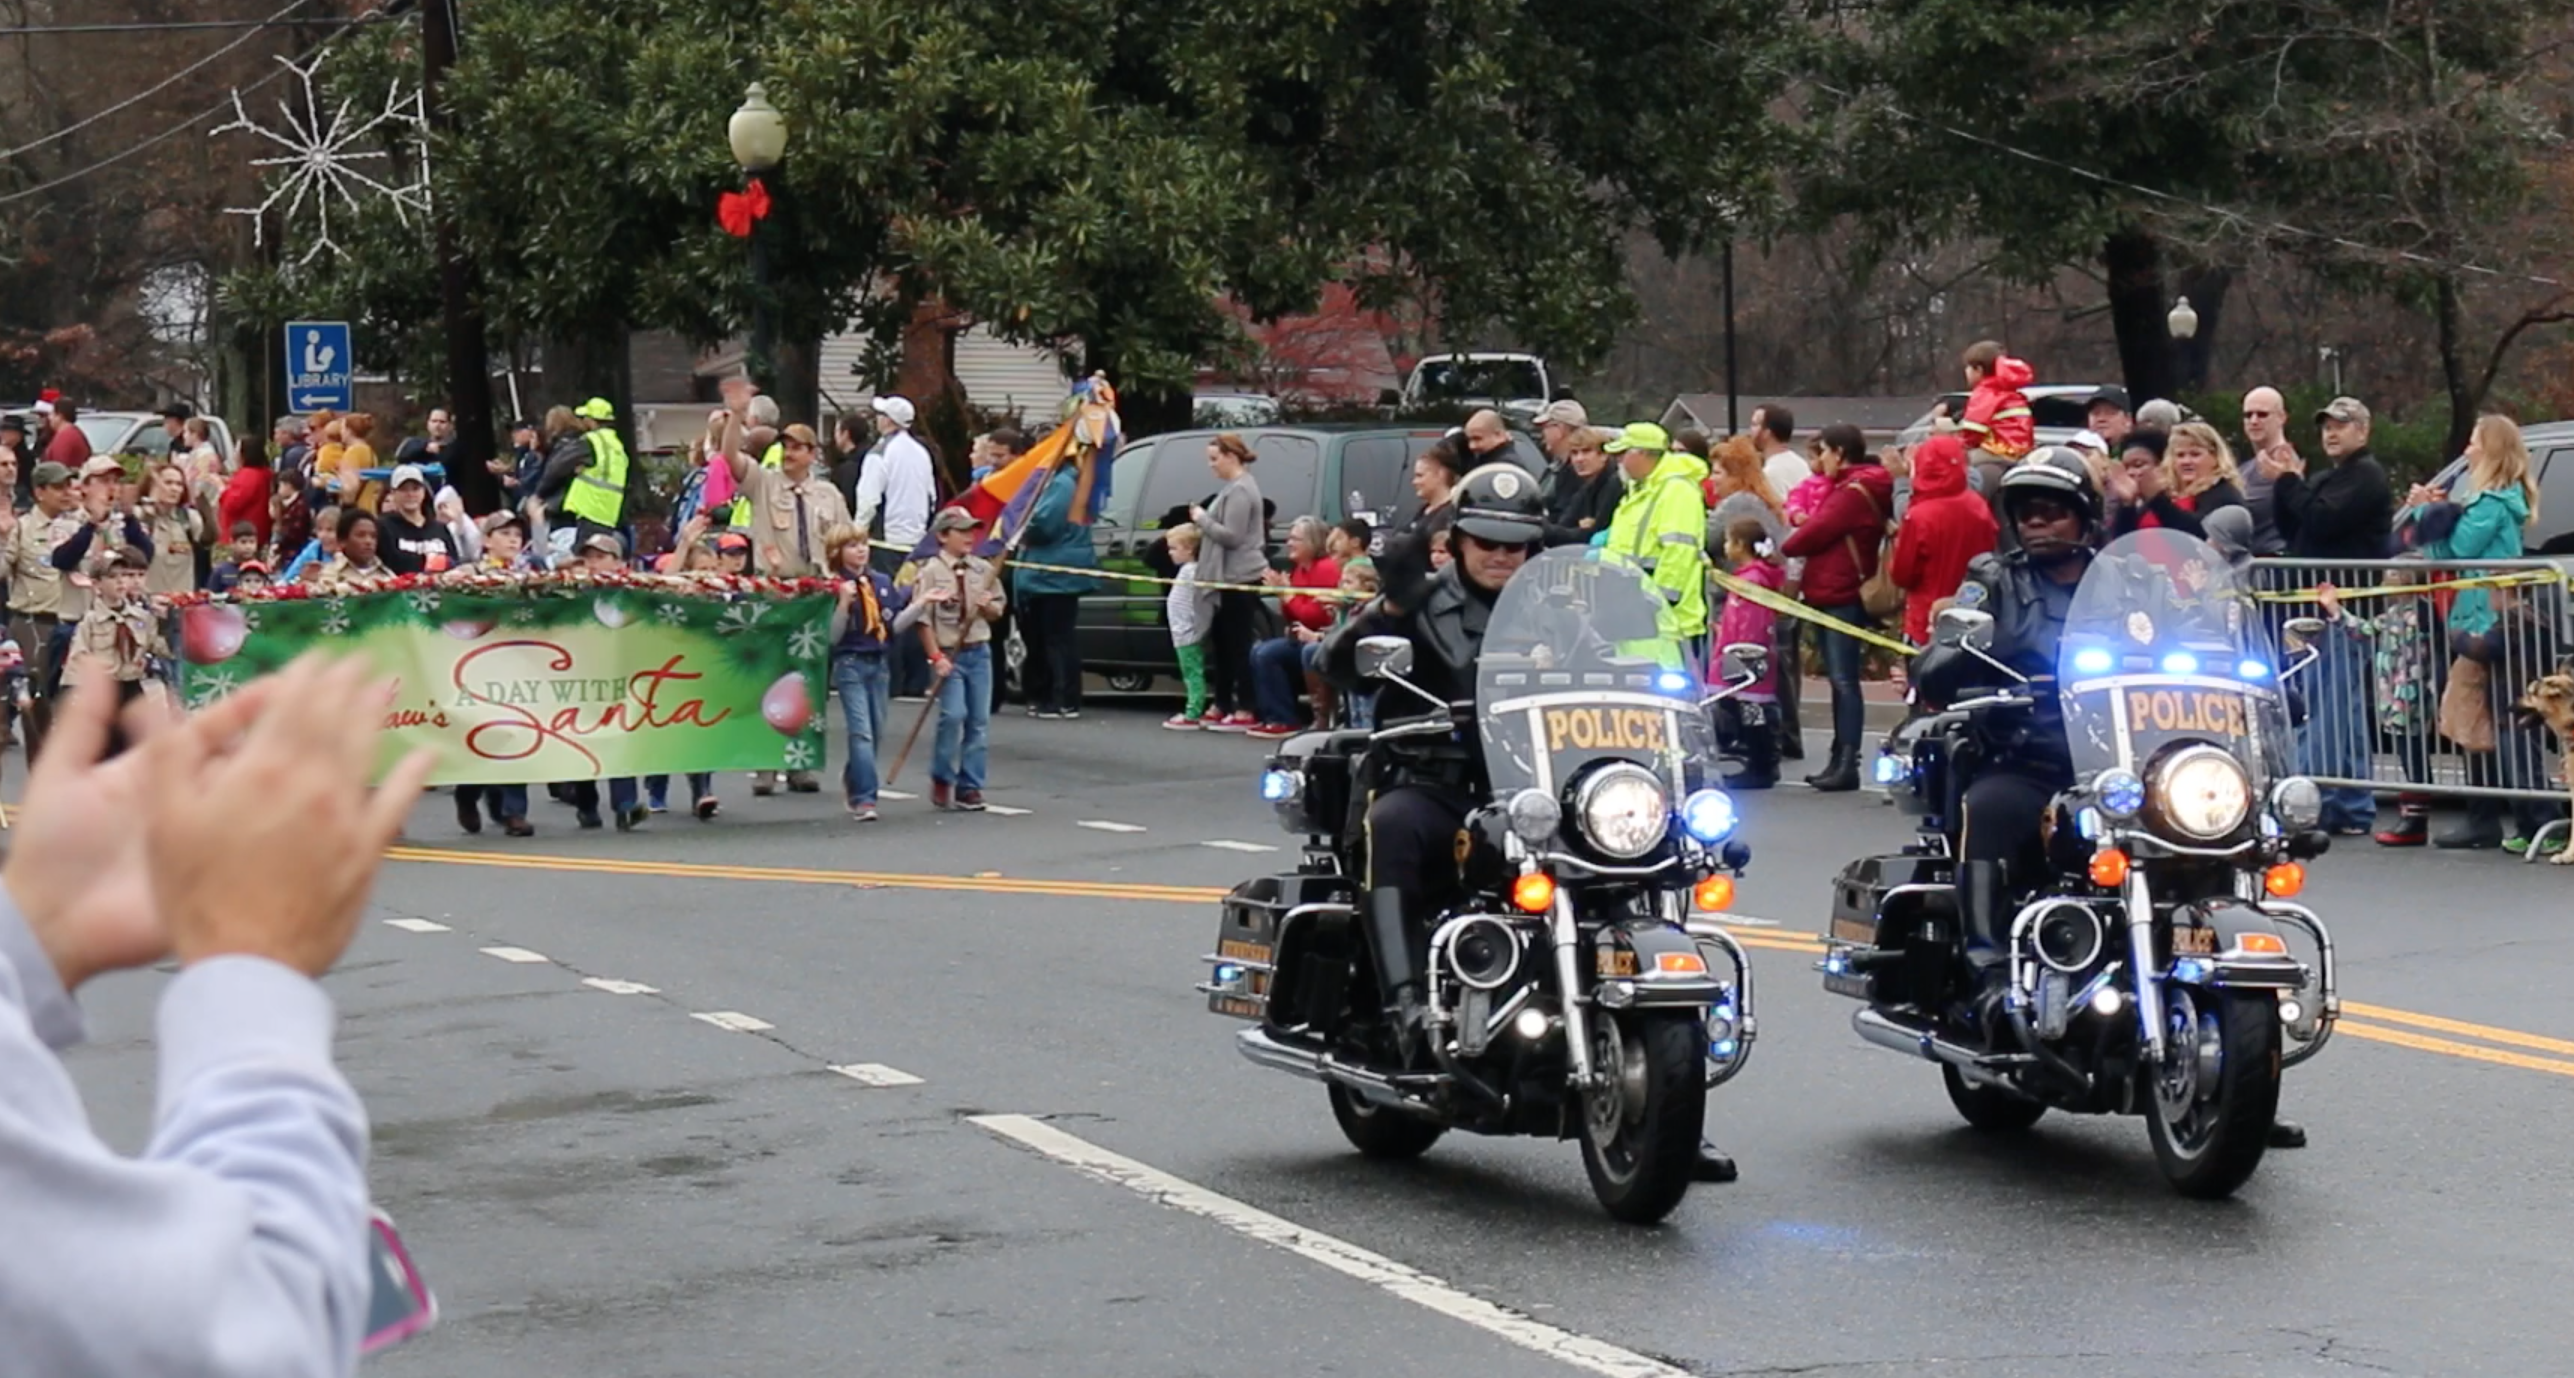 Police motorcycles Kennesaw parade